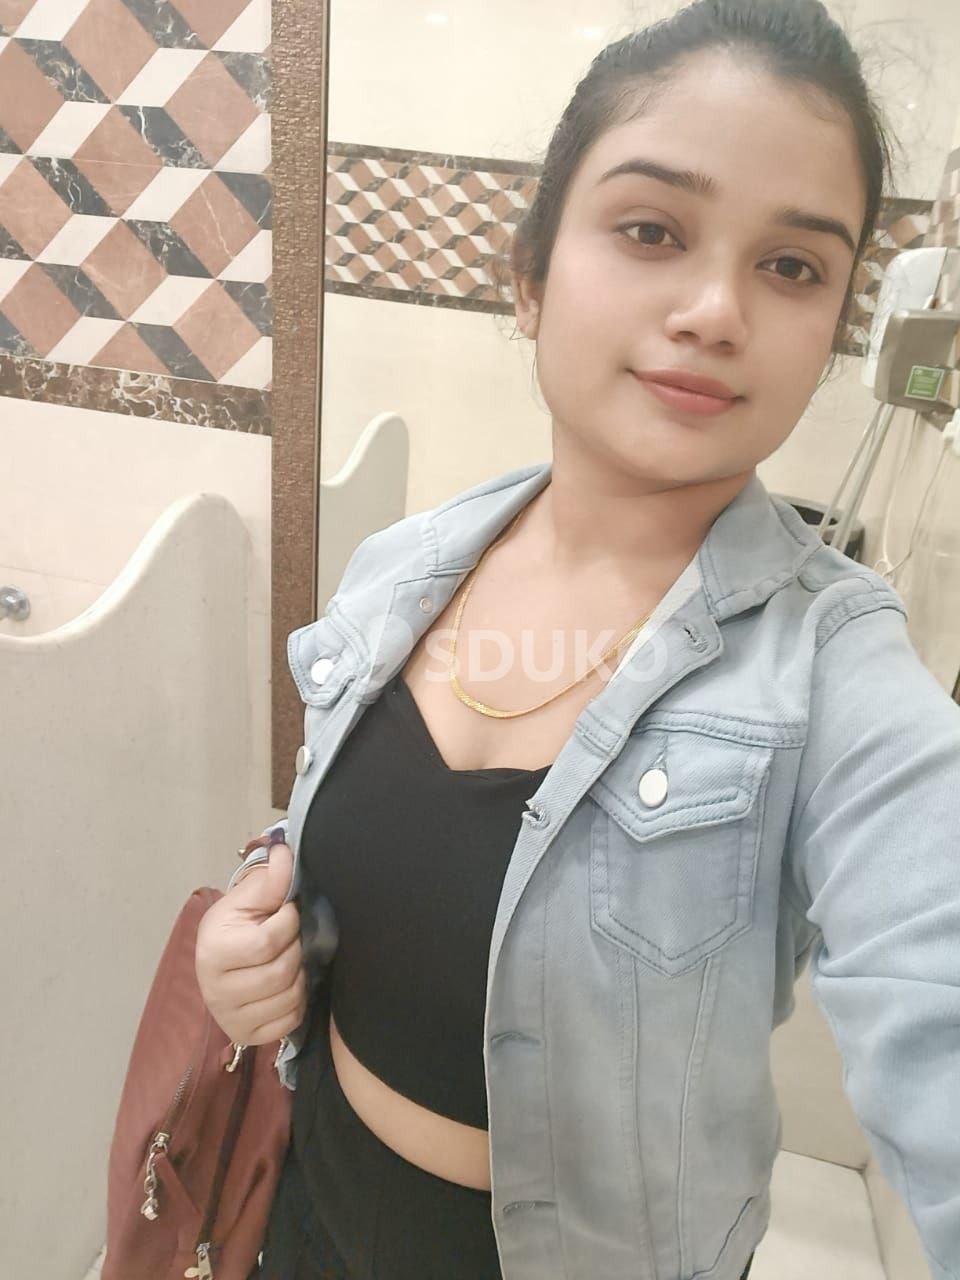 24x7 Special Pune❤️ professional independent kavya escort best modal low cost provide